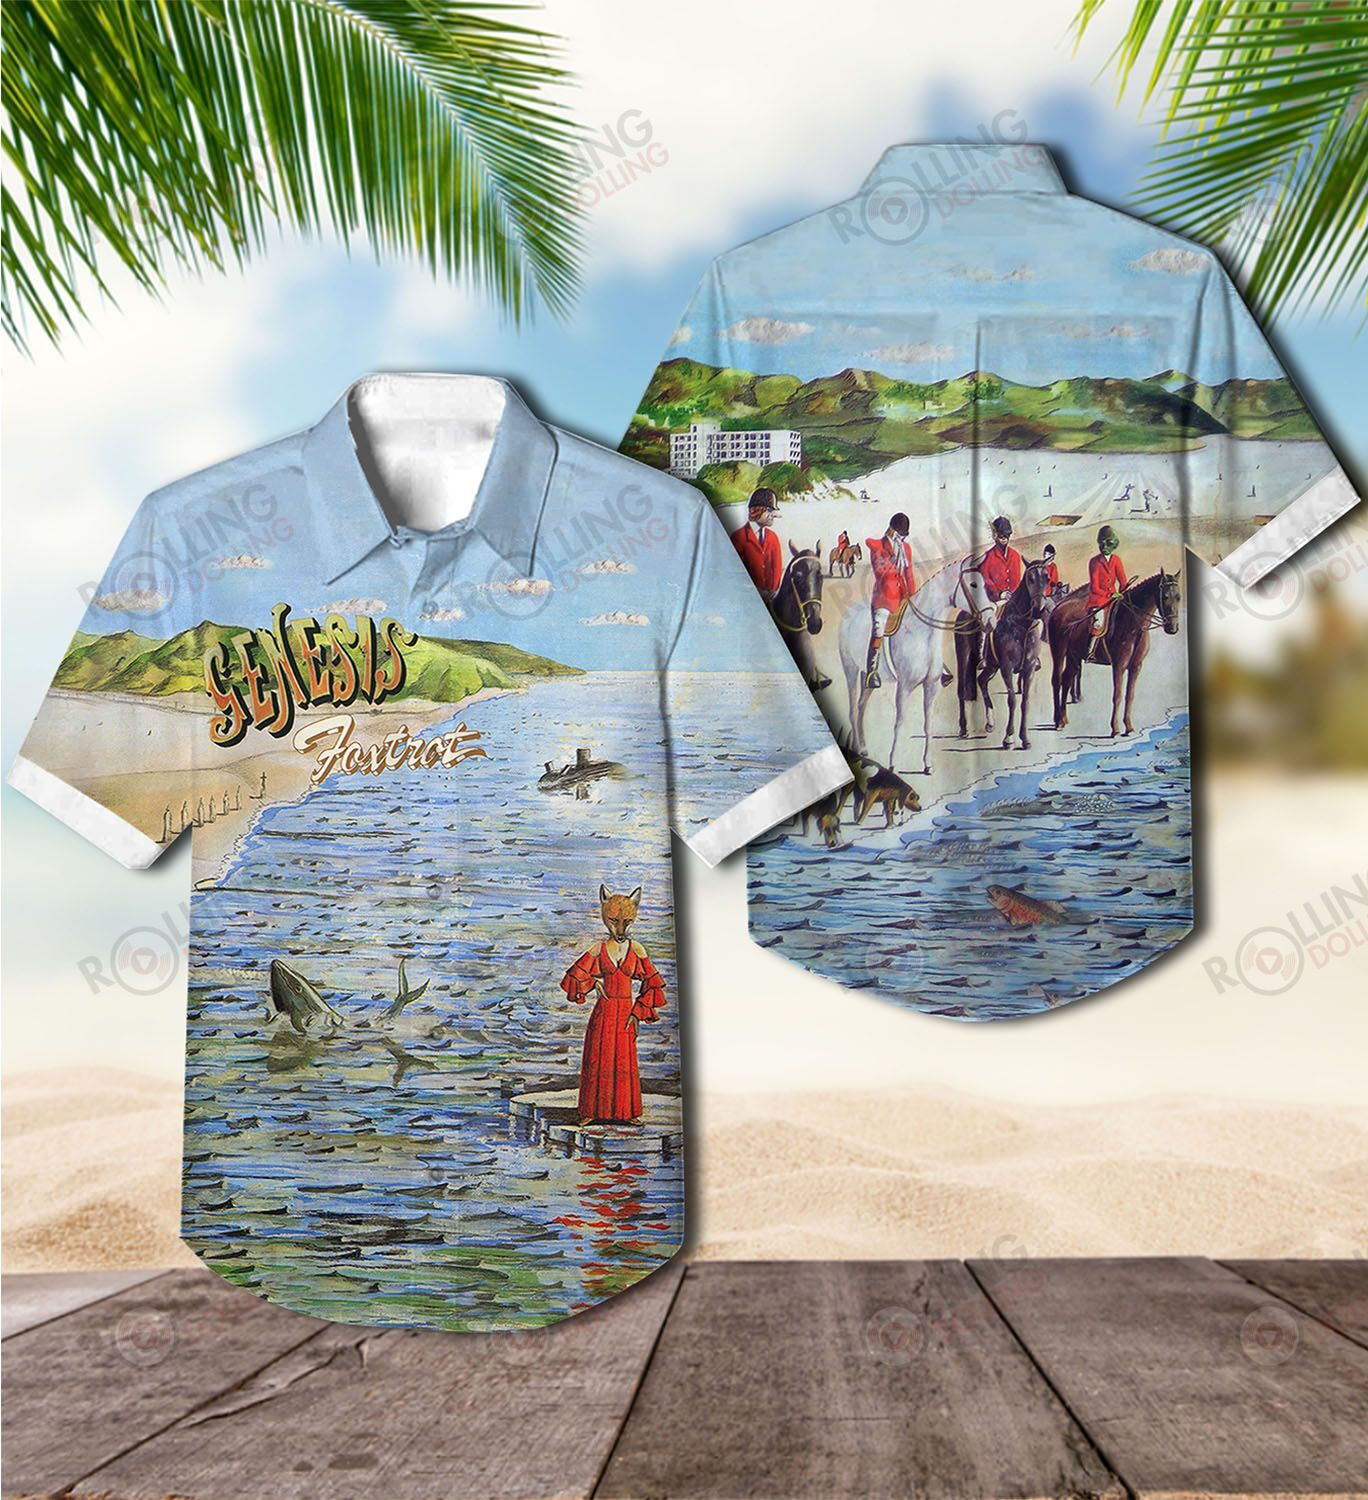 You'll have the perfect vacation outfit with this Hawaiian shirt 387